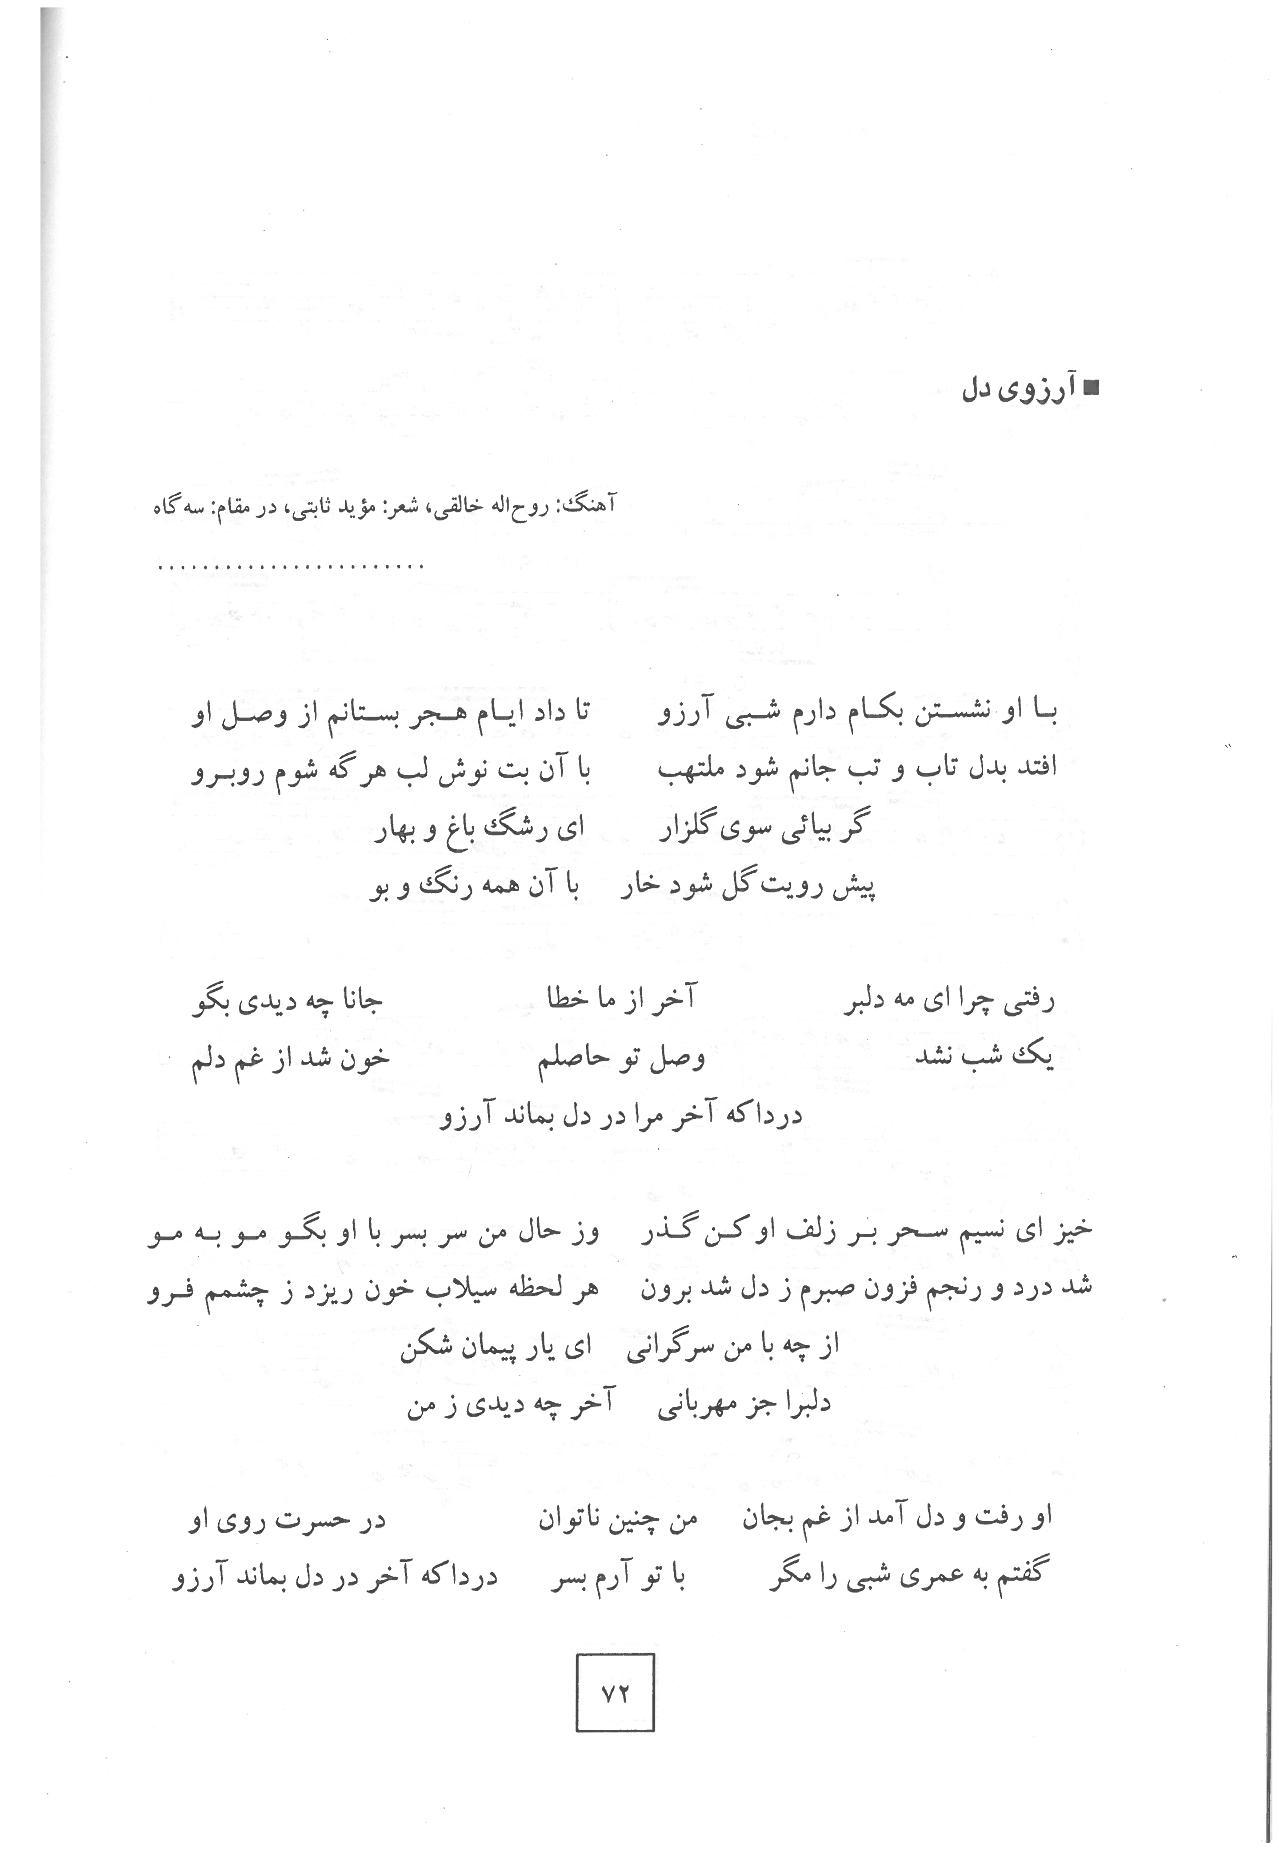 A page of an arabic language letter with writing.